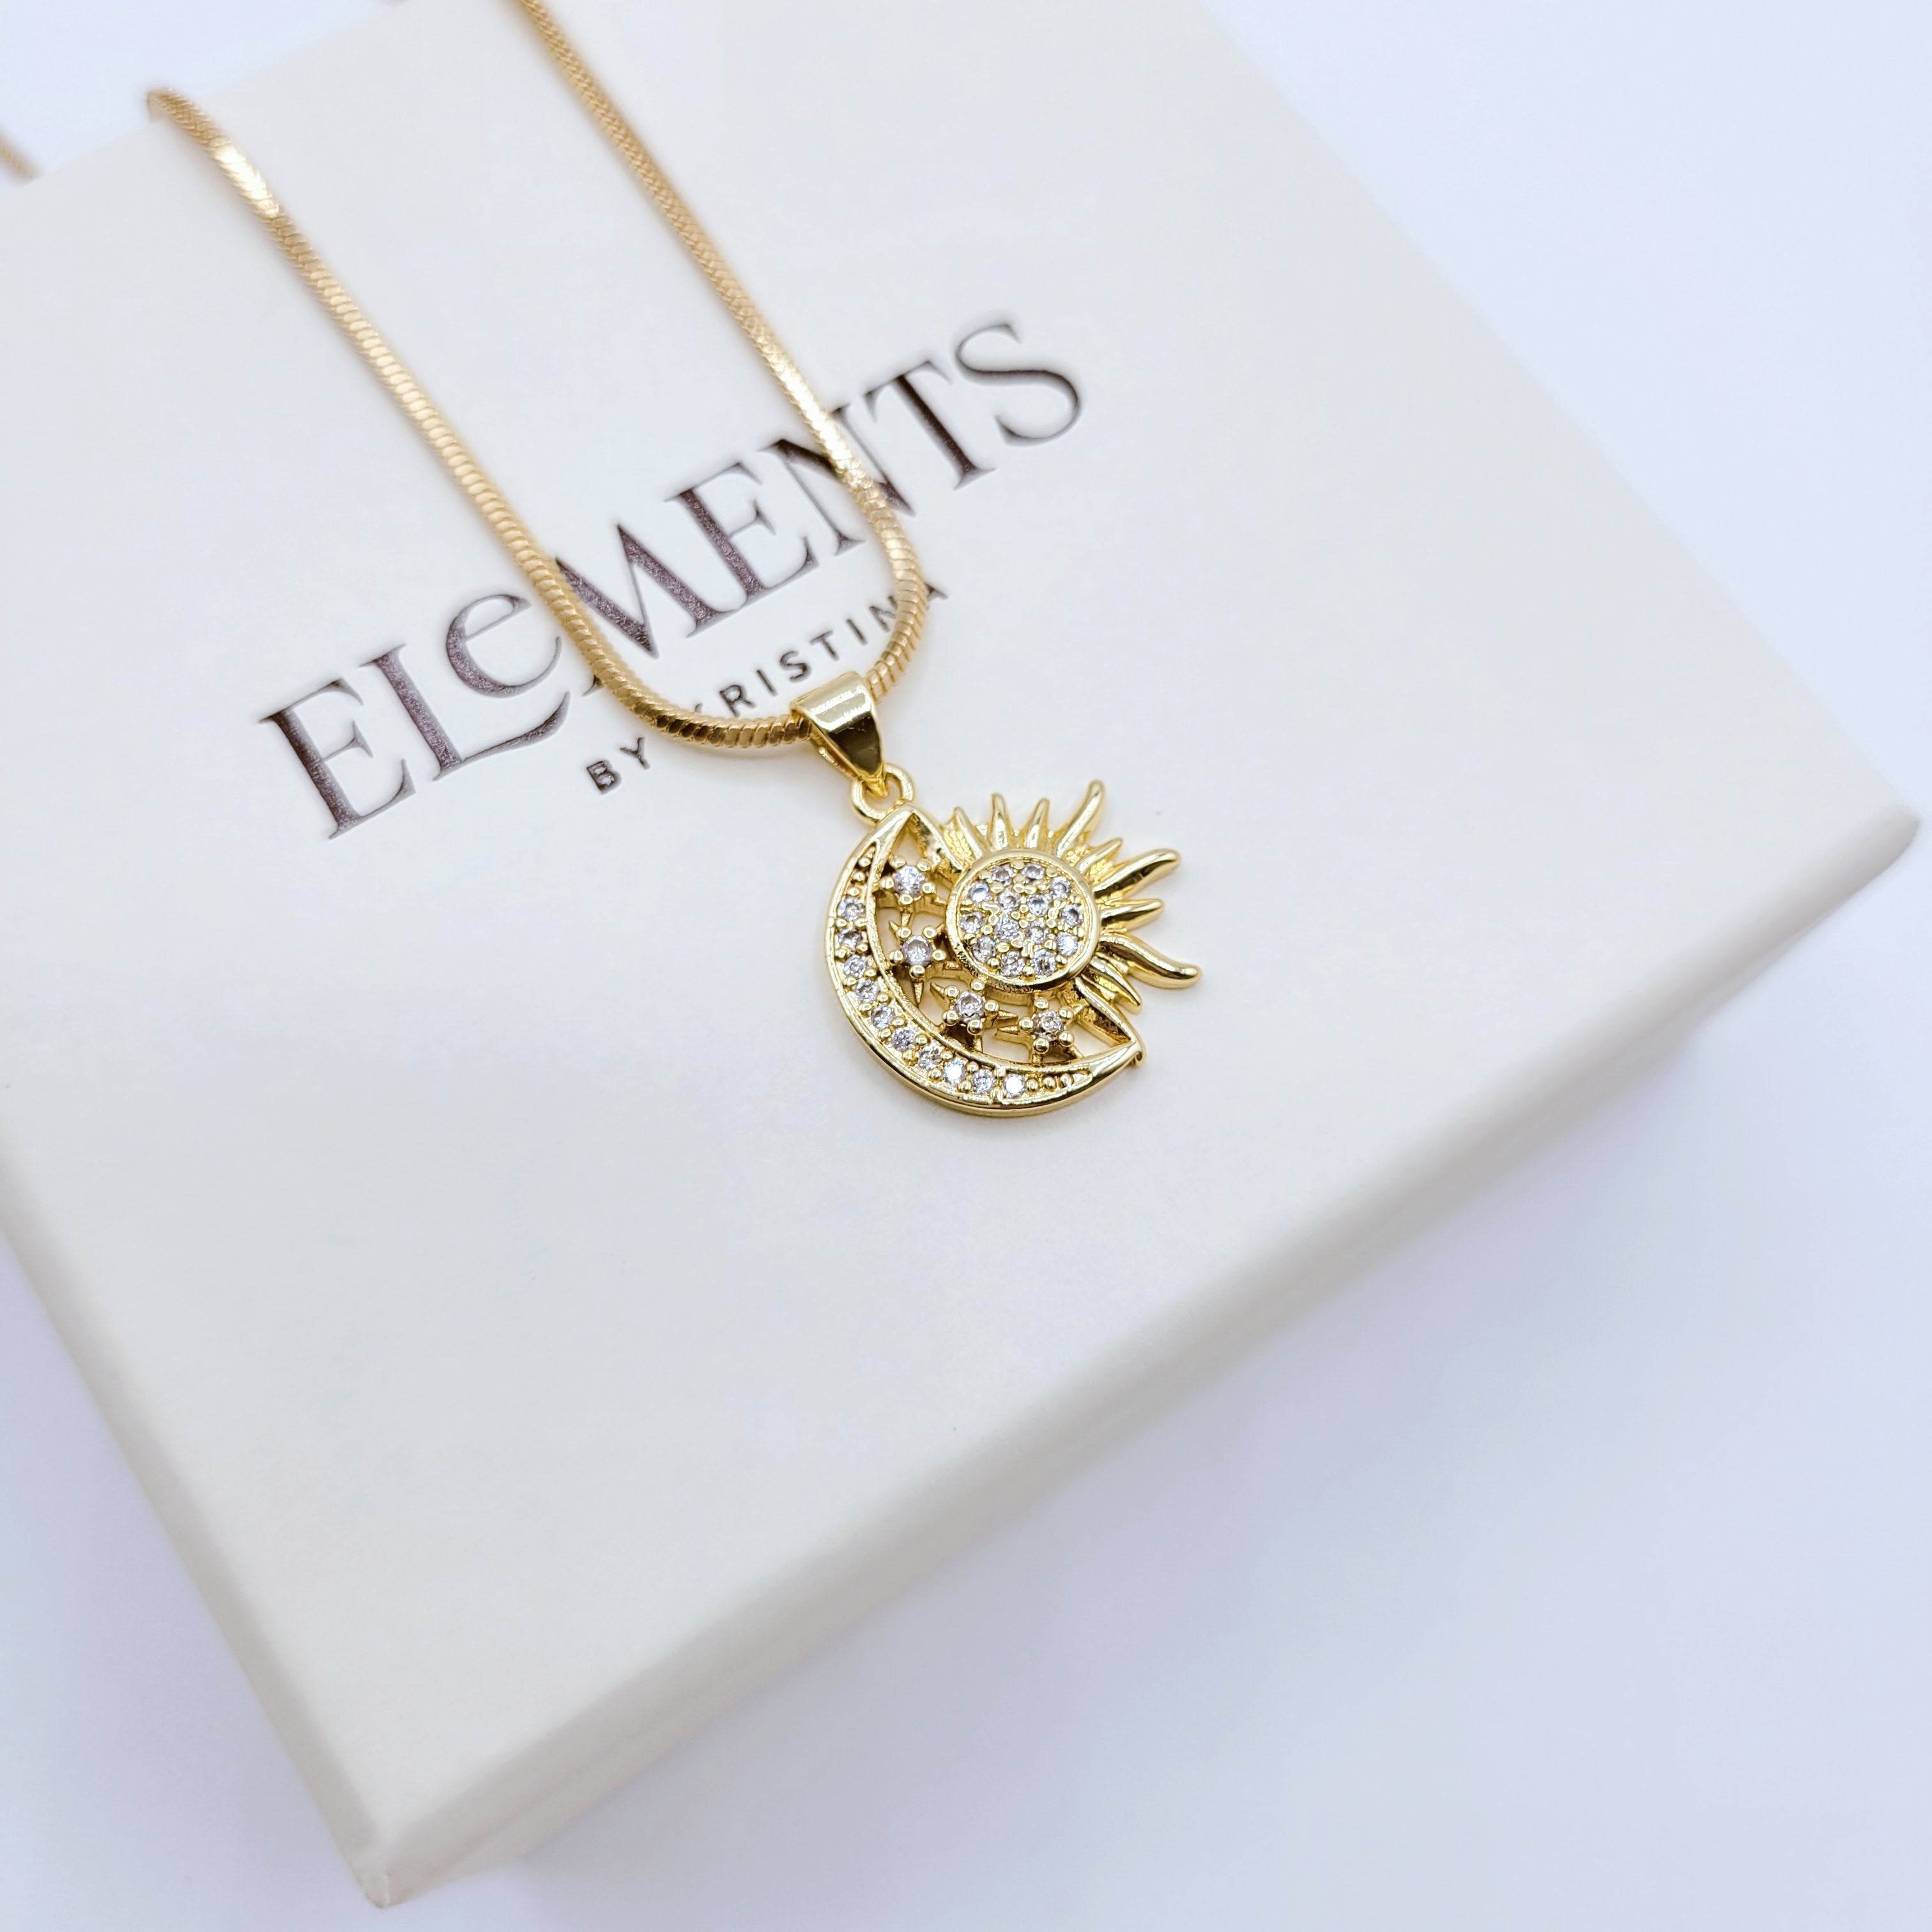 Top Collection Of Gold Jewelry With Moon And Sun Symbols